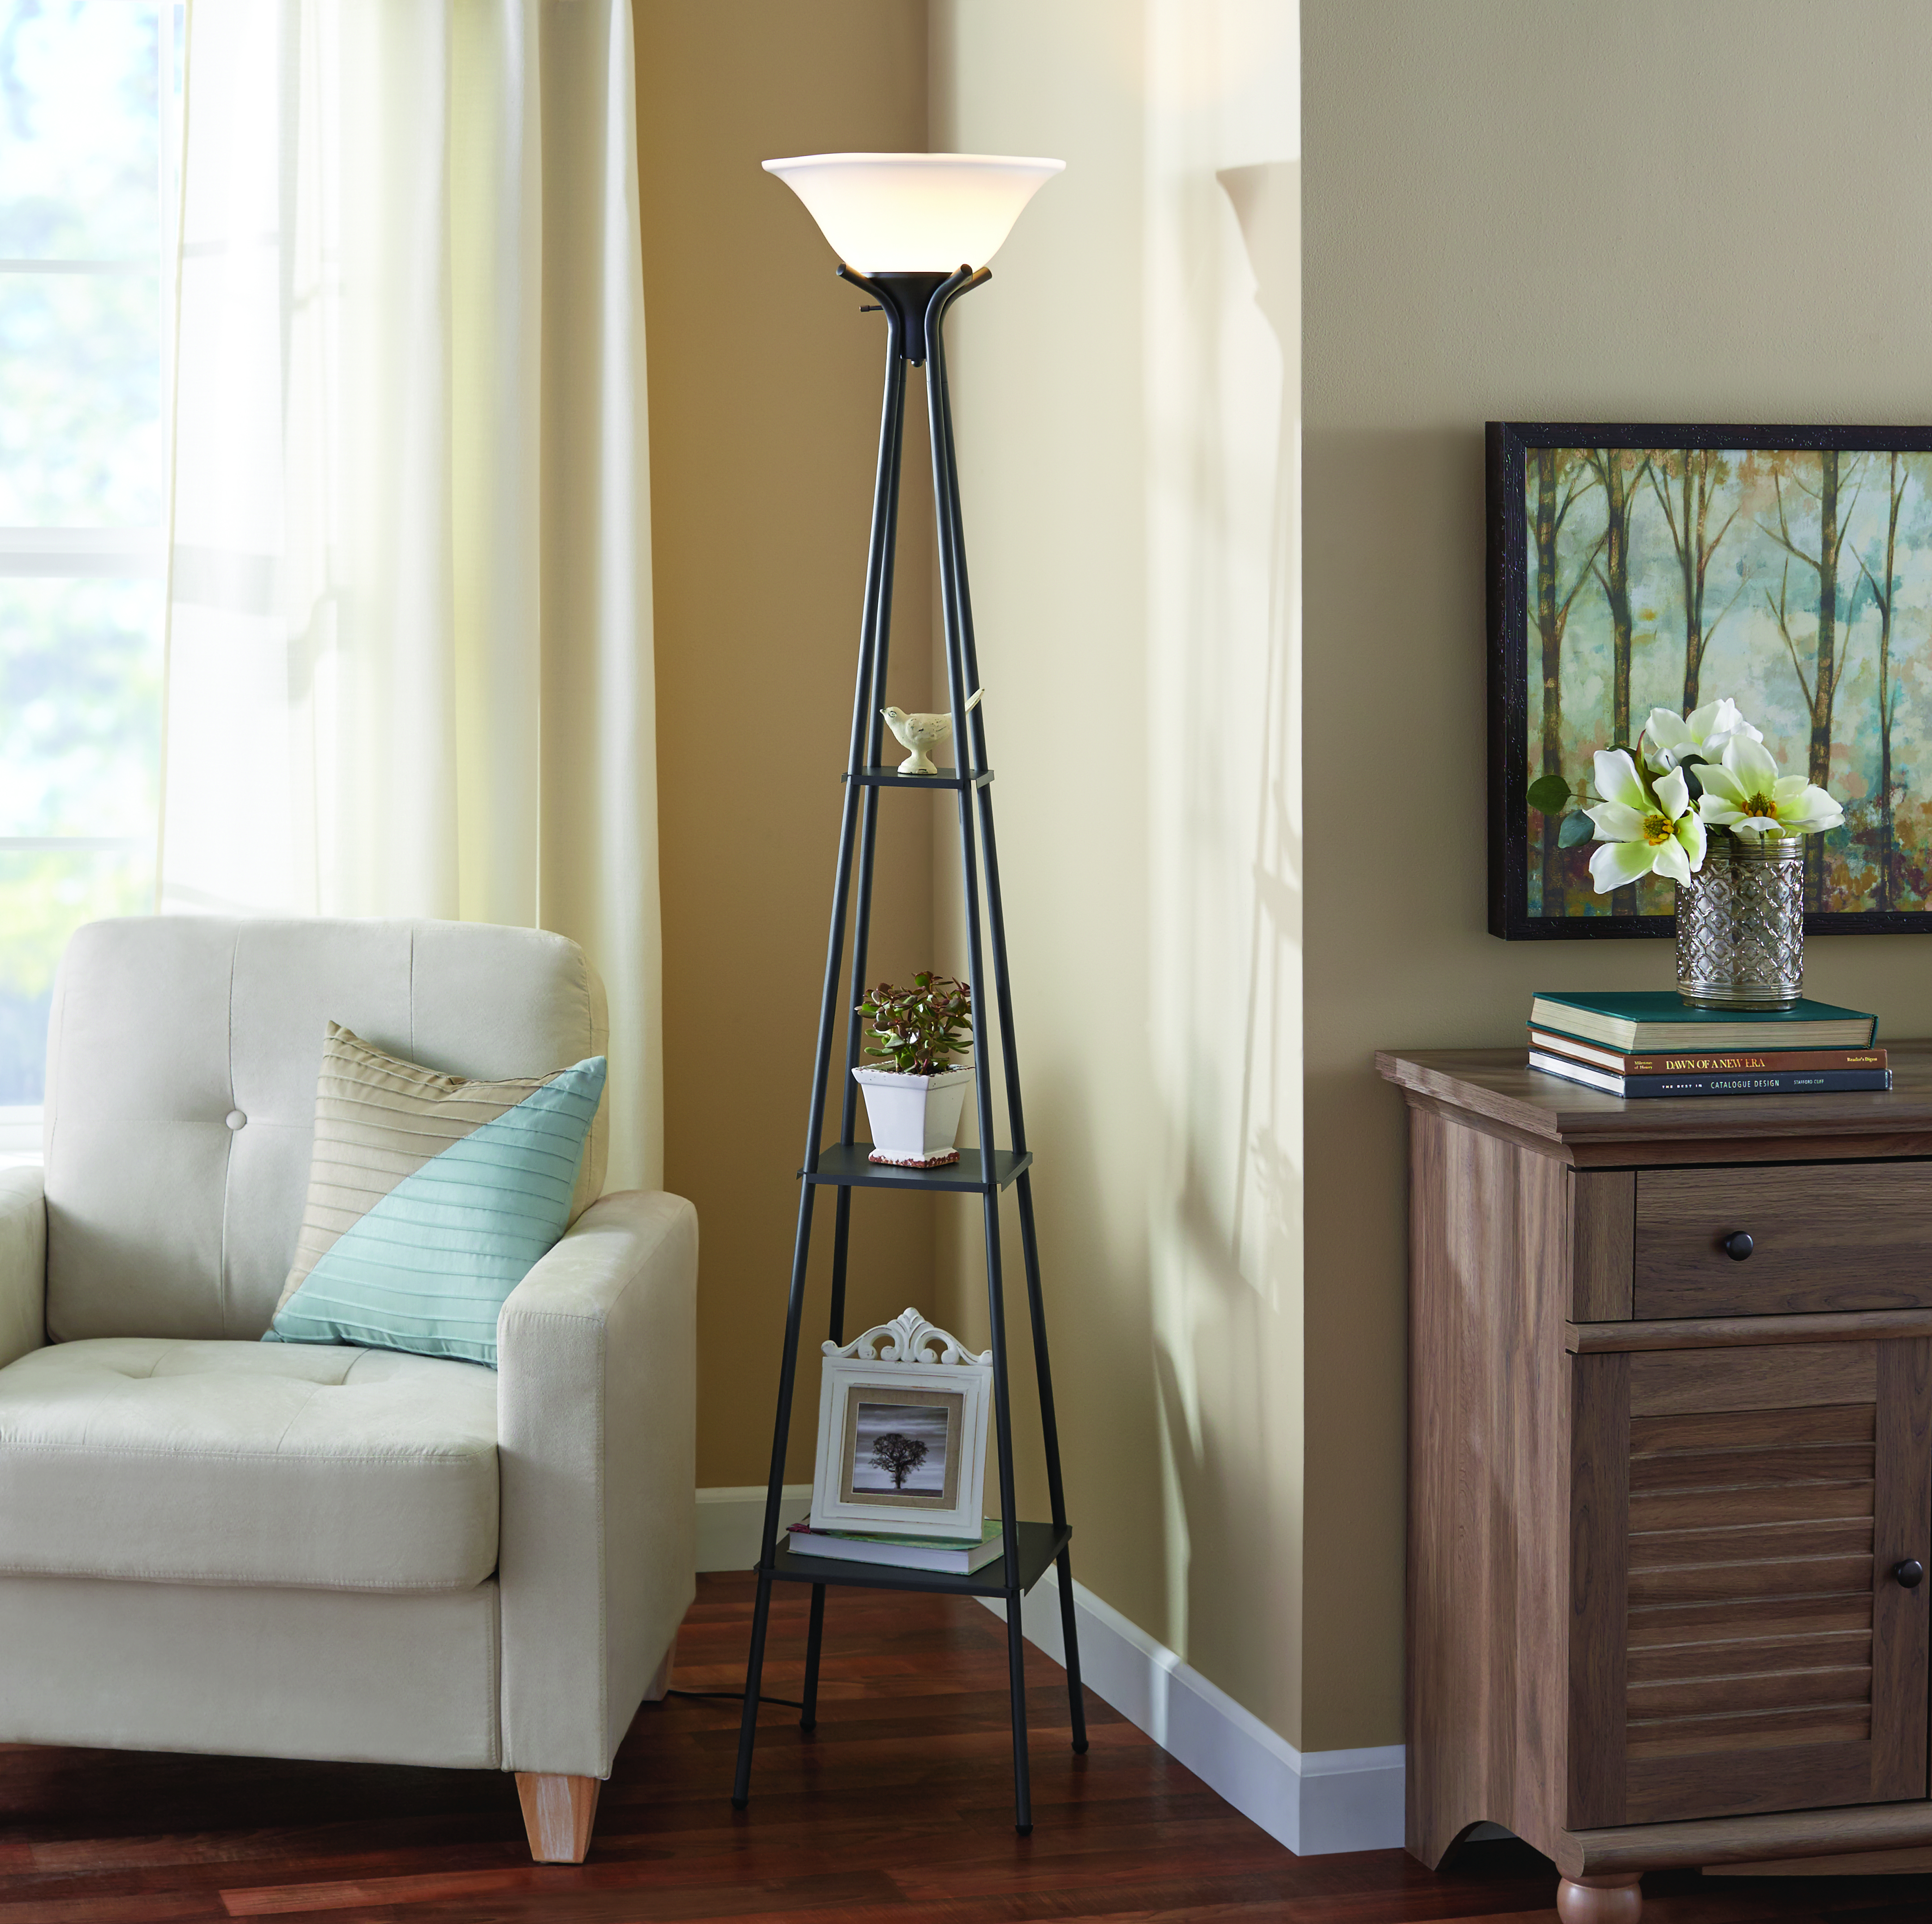 Mainstays 69 Etagere Floor Lamp Dark Charcoal Finish throughout measurements 4312 X 4294